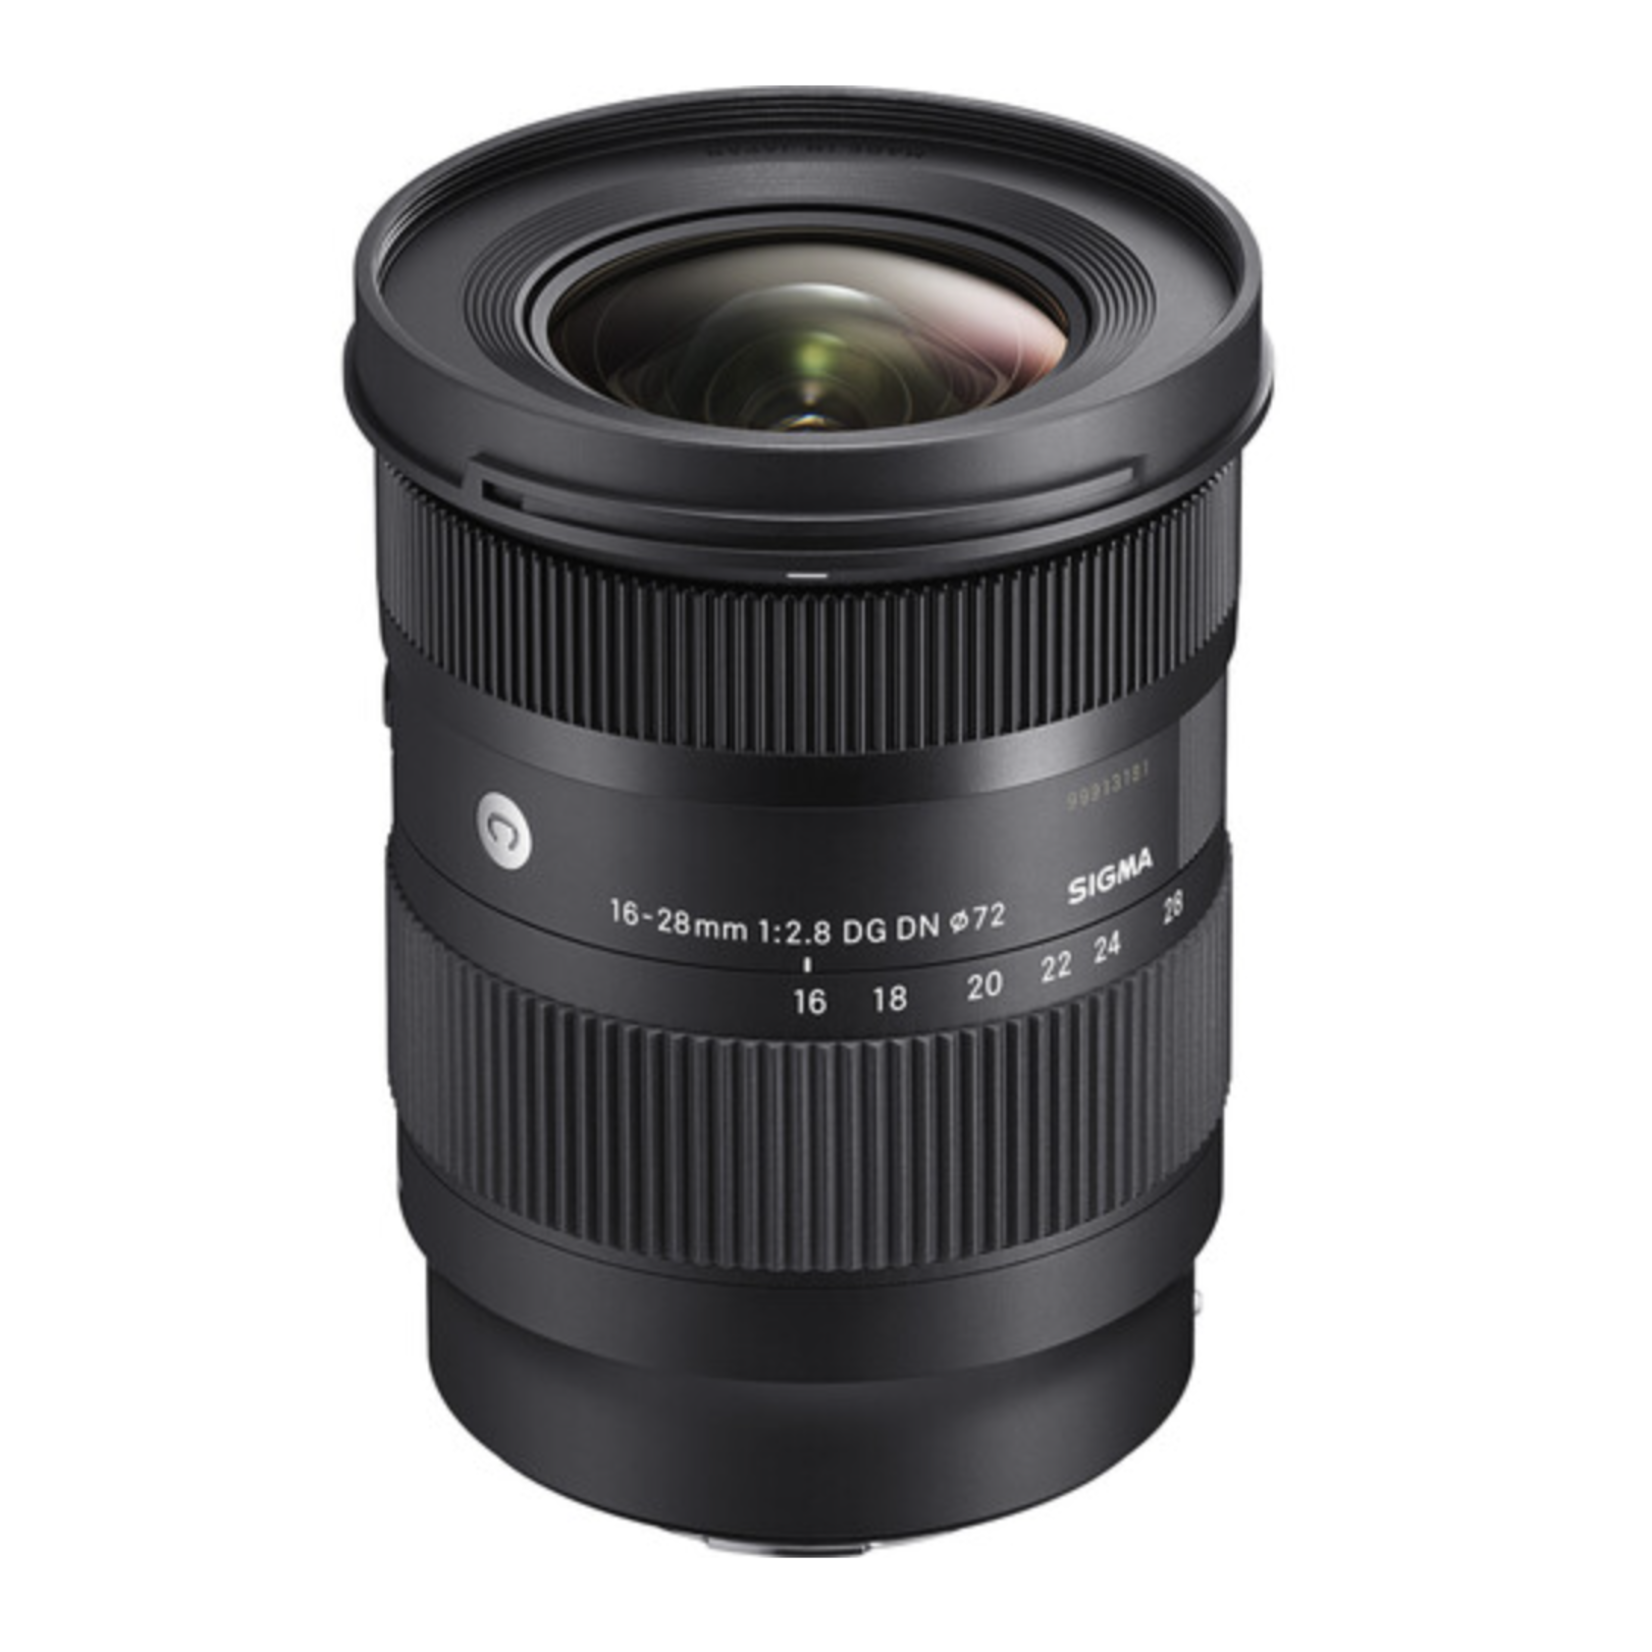 Sigma Sigma 16-28mm DG DN for Sony E Mount